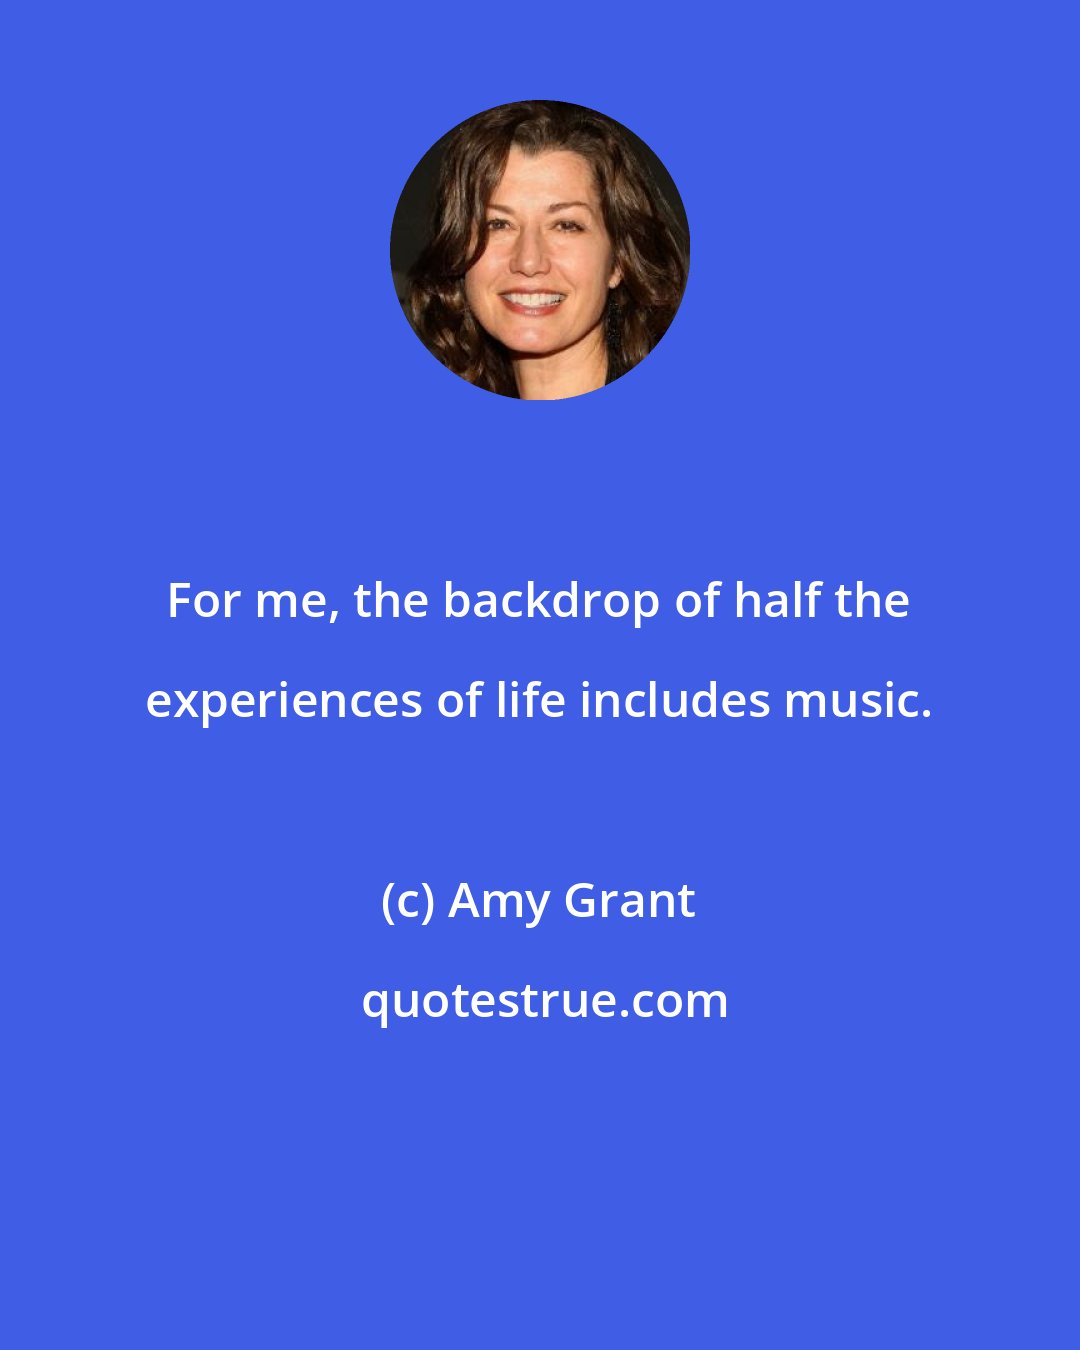 Amy Grant: For me, the backdrop of half the experiences of life includes music.